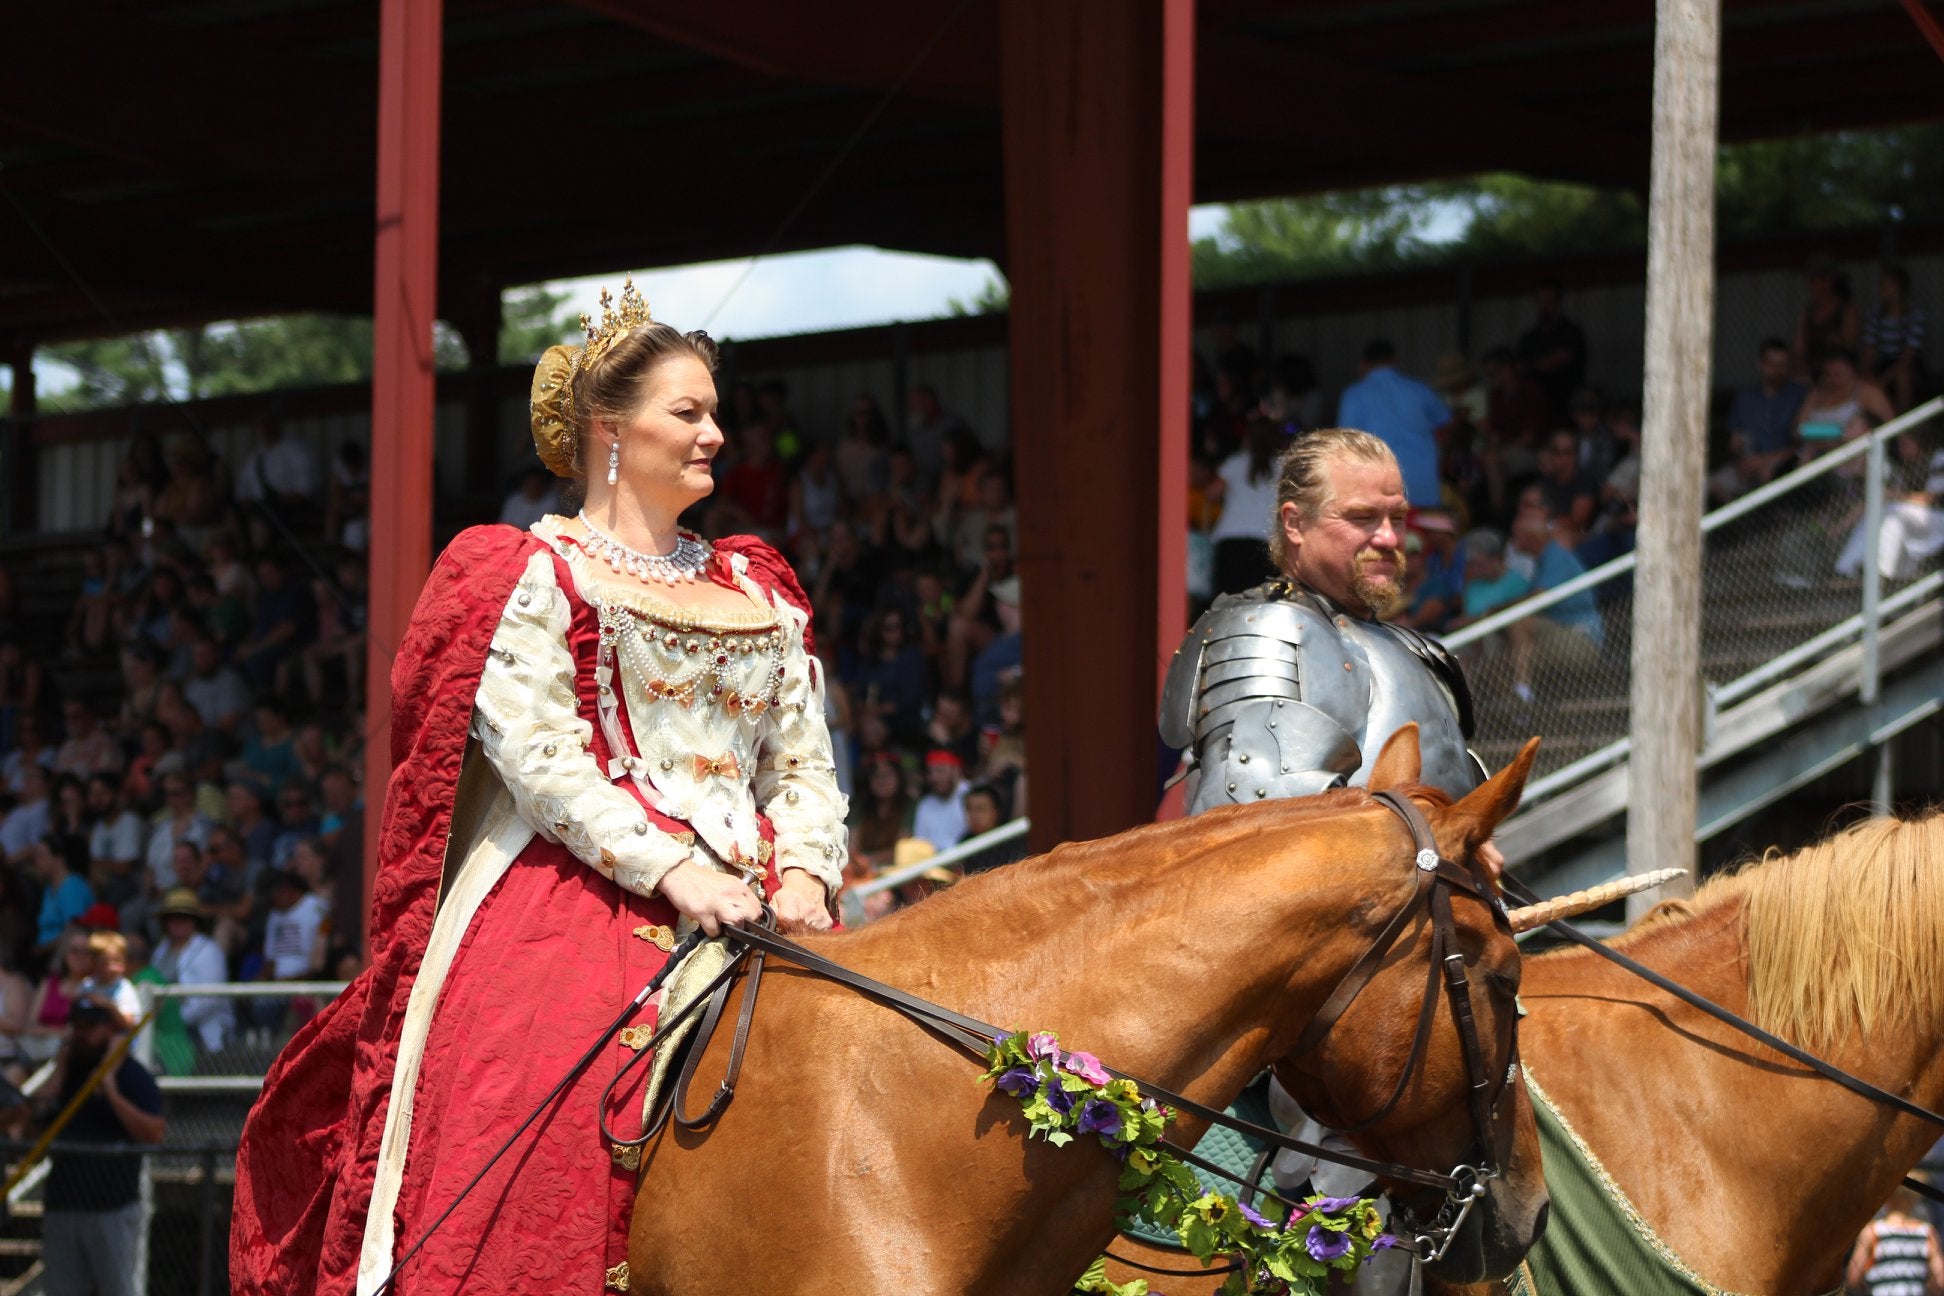 What to Expect at Your First Renaissance Faire